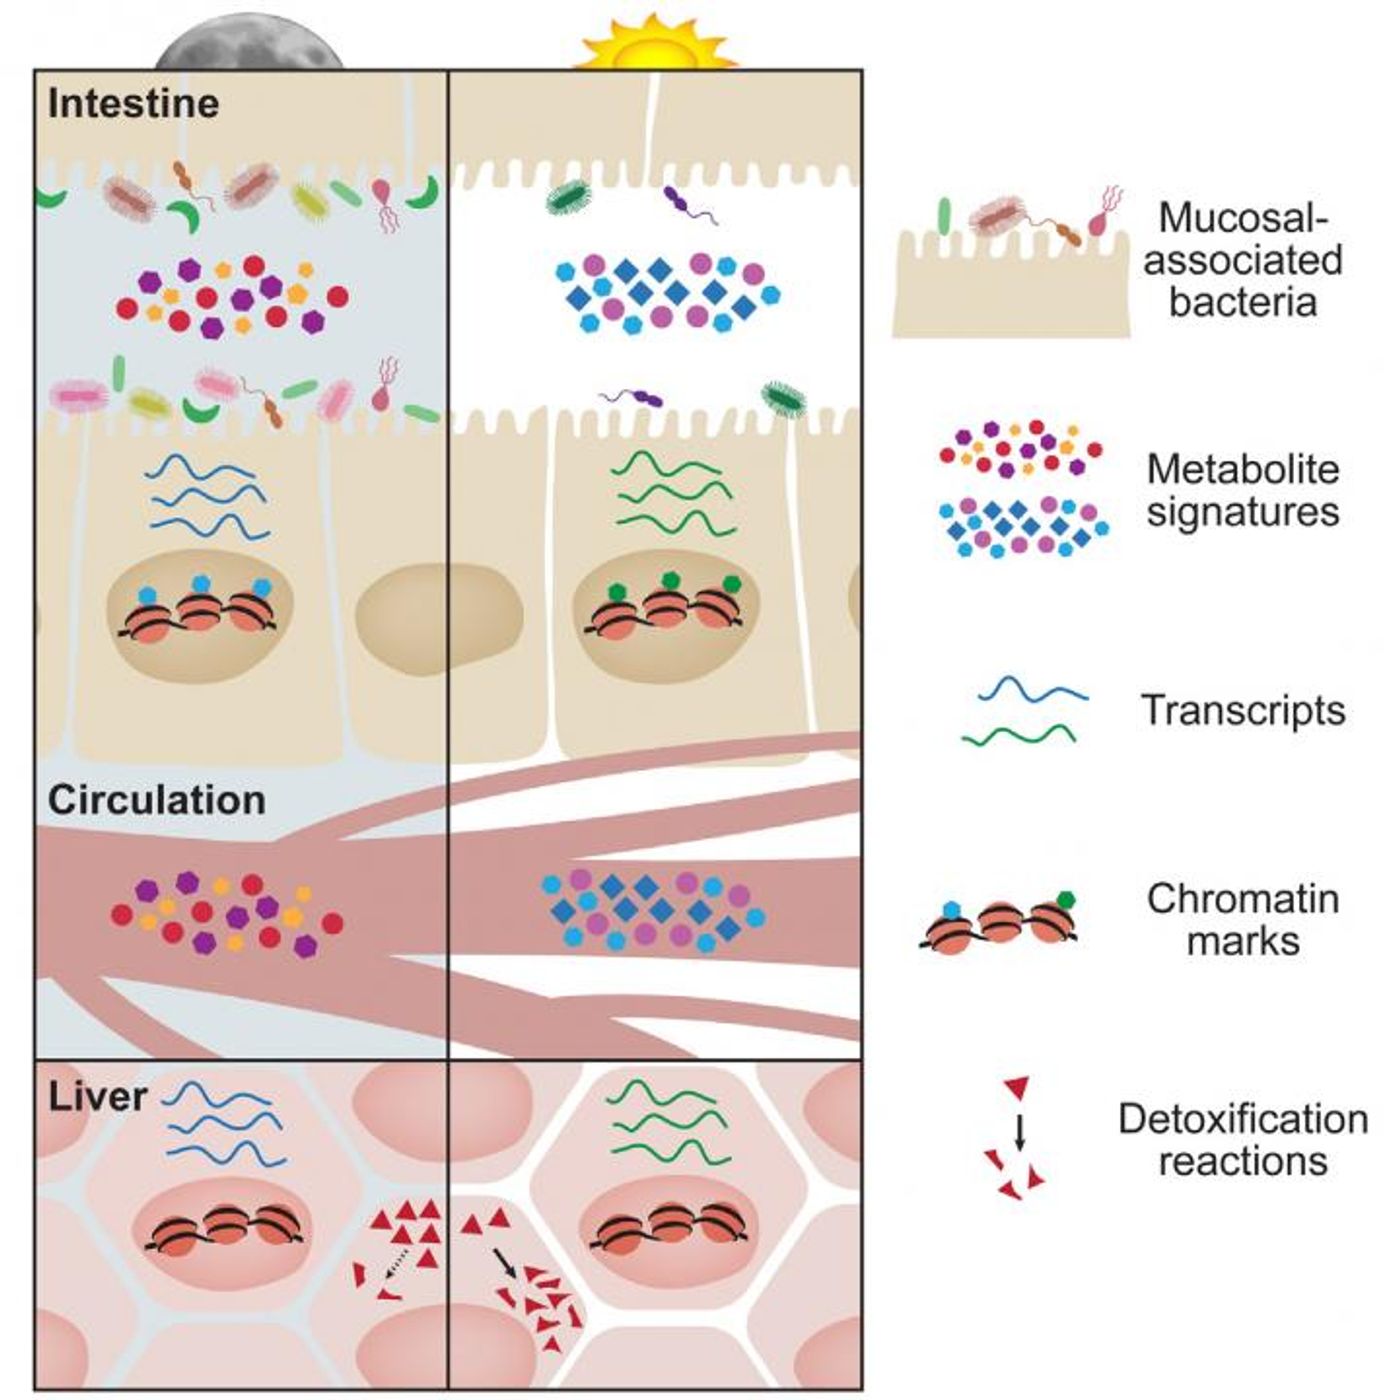 This visual abstract depicts the findings of Thaiss et al, who show diurnal oscillations in microbial localization and metabolite production in the gut have a major impact on the circadian epigenetic and transcriptional landscape of host tissues, not only locally, but also at distant sites such as the liver. /Credit: Thaiss et al/Cell 2016